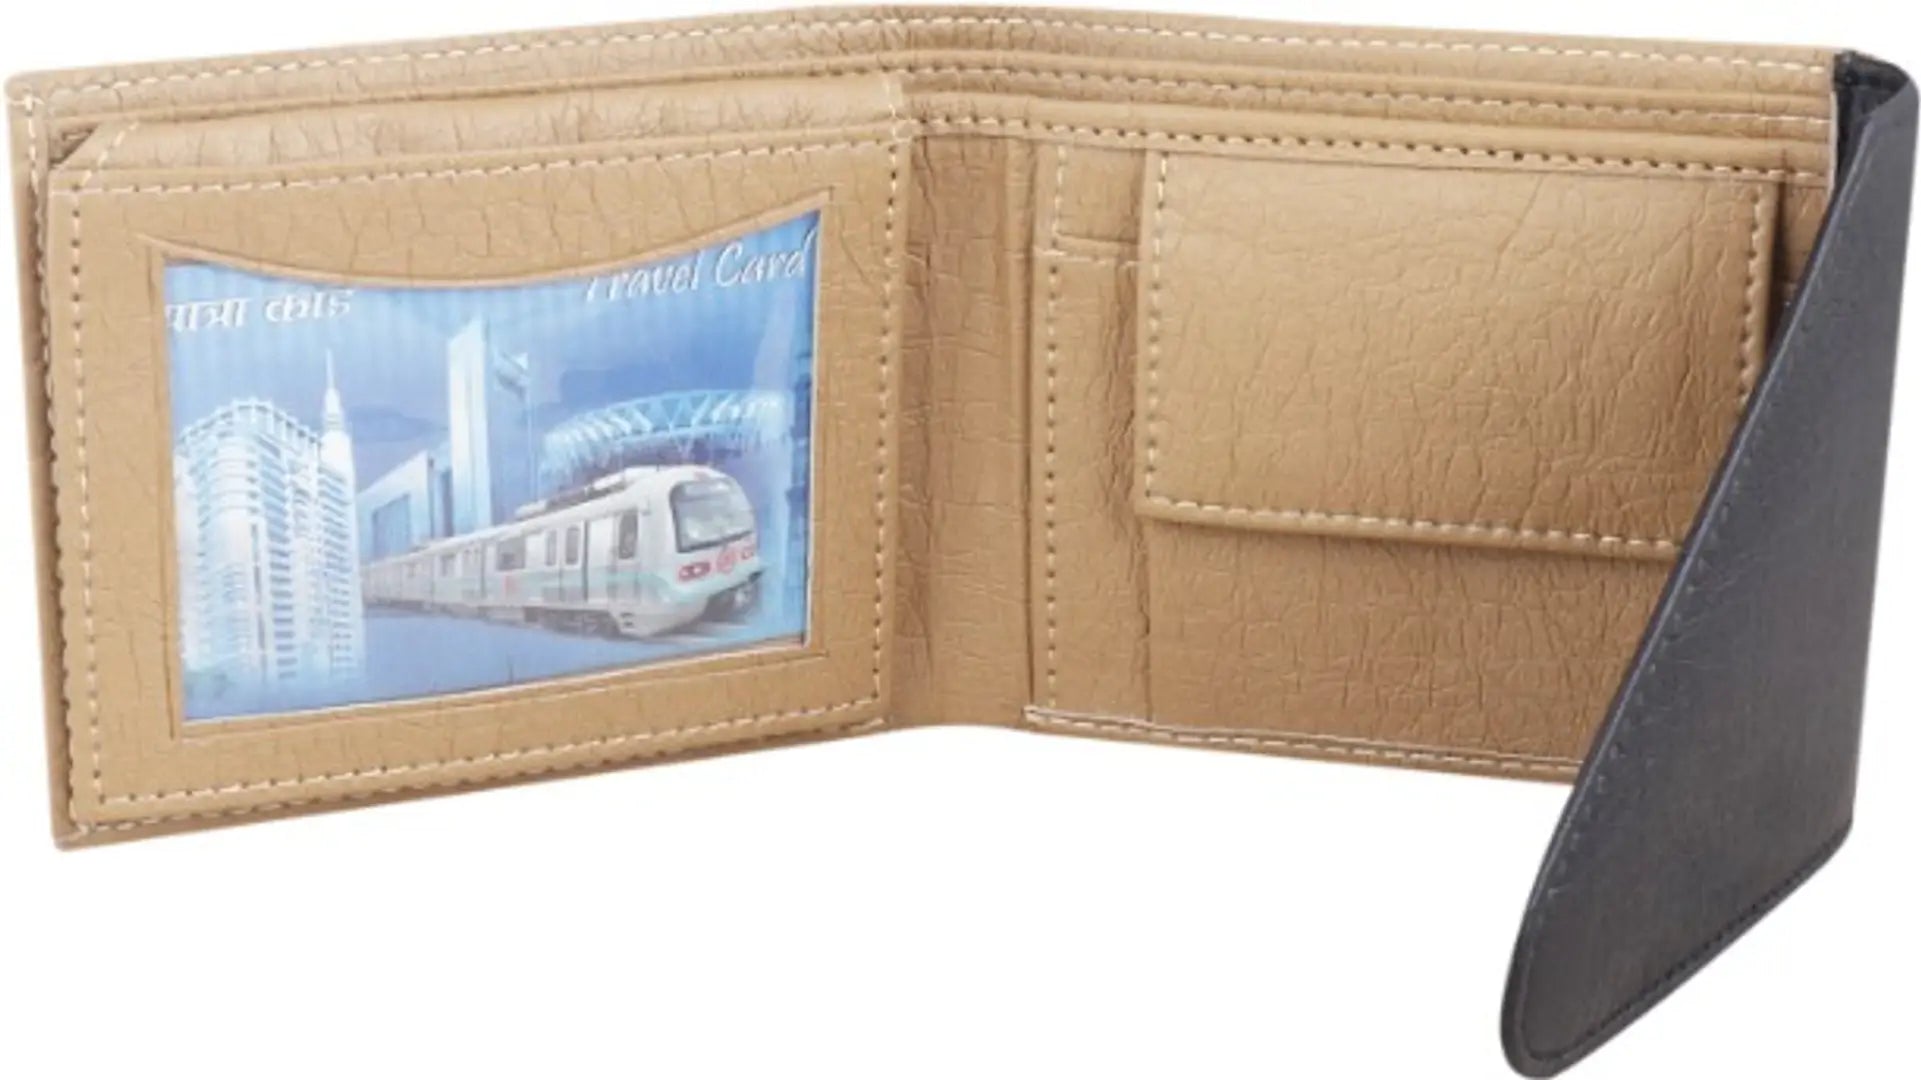 Classy Solid Wallets for Men